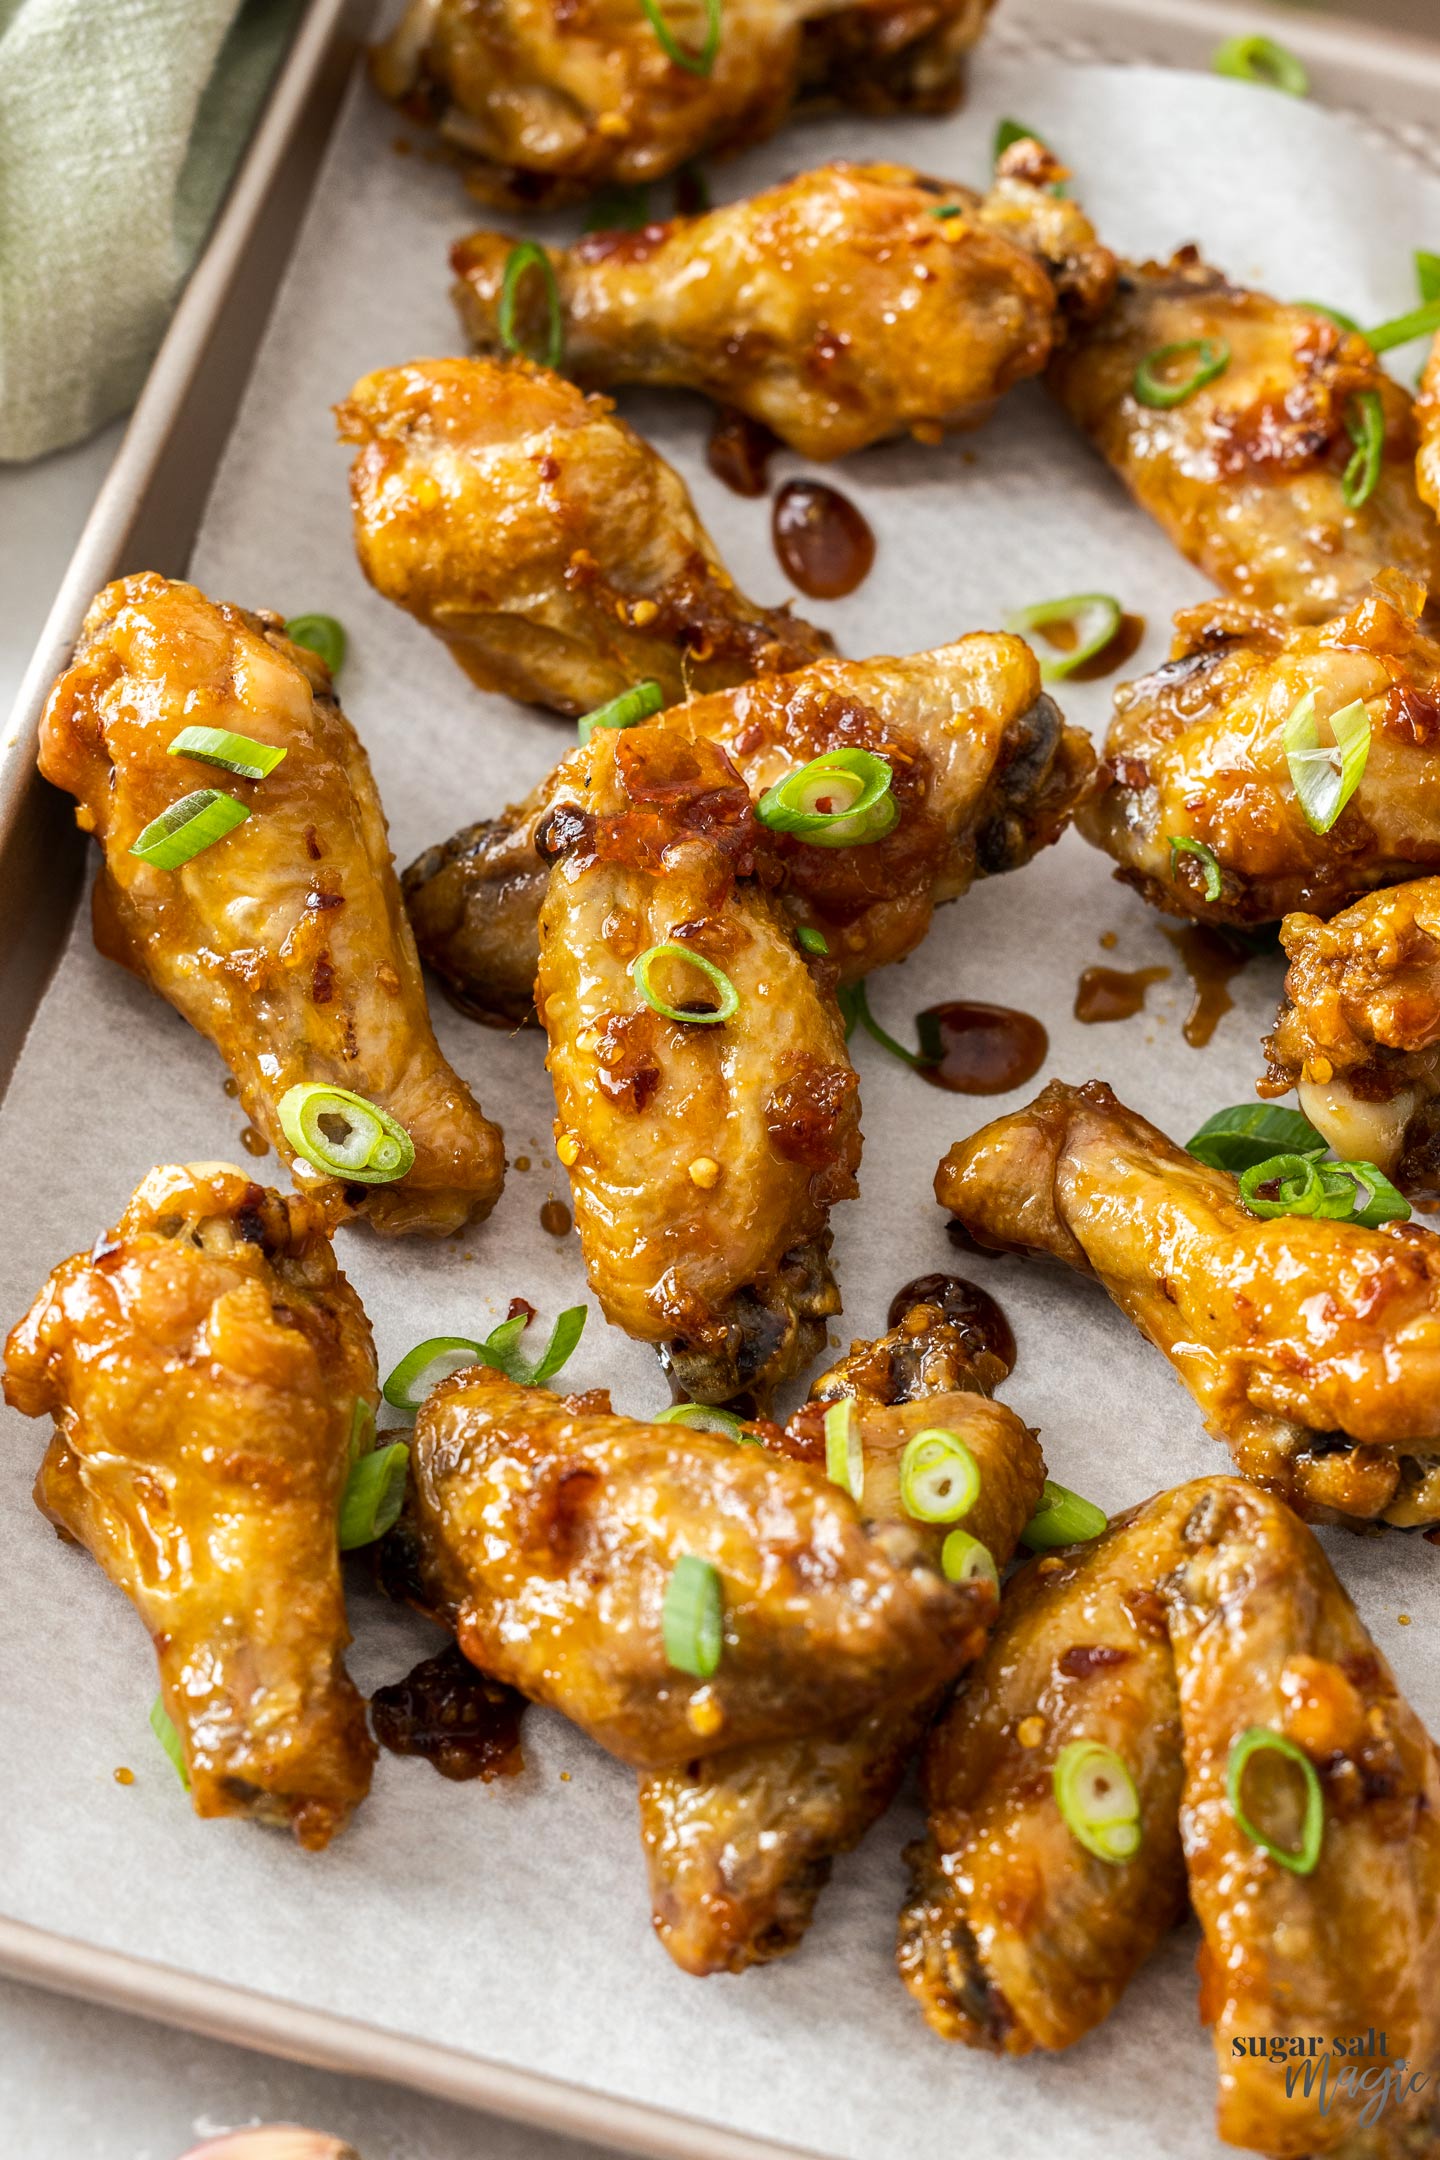 A batch of baked chicken wings on a baking tray.